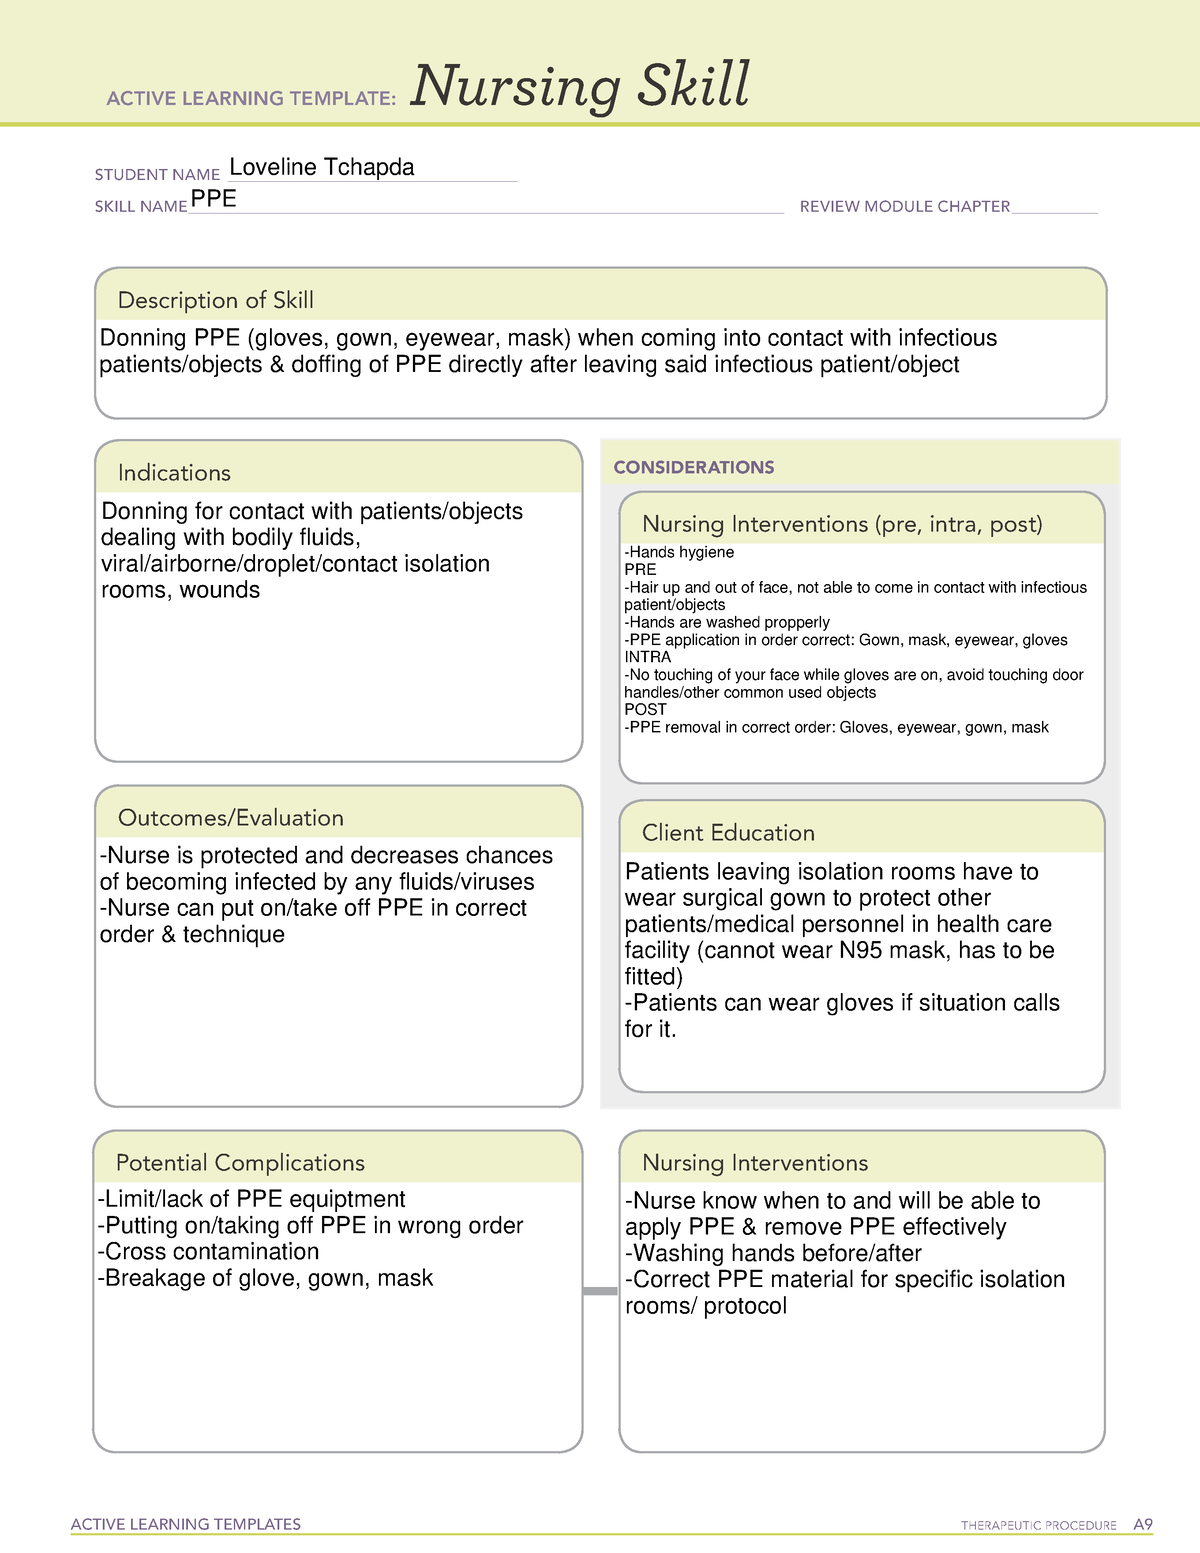 Template Nursing Skill PPE To finish ACTIVE LEARNING TEMPLATES